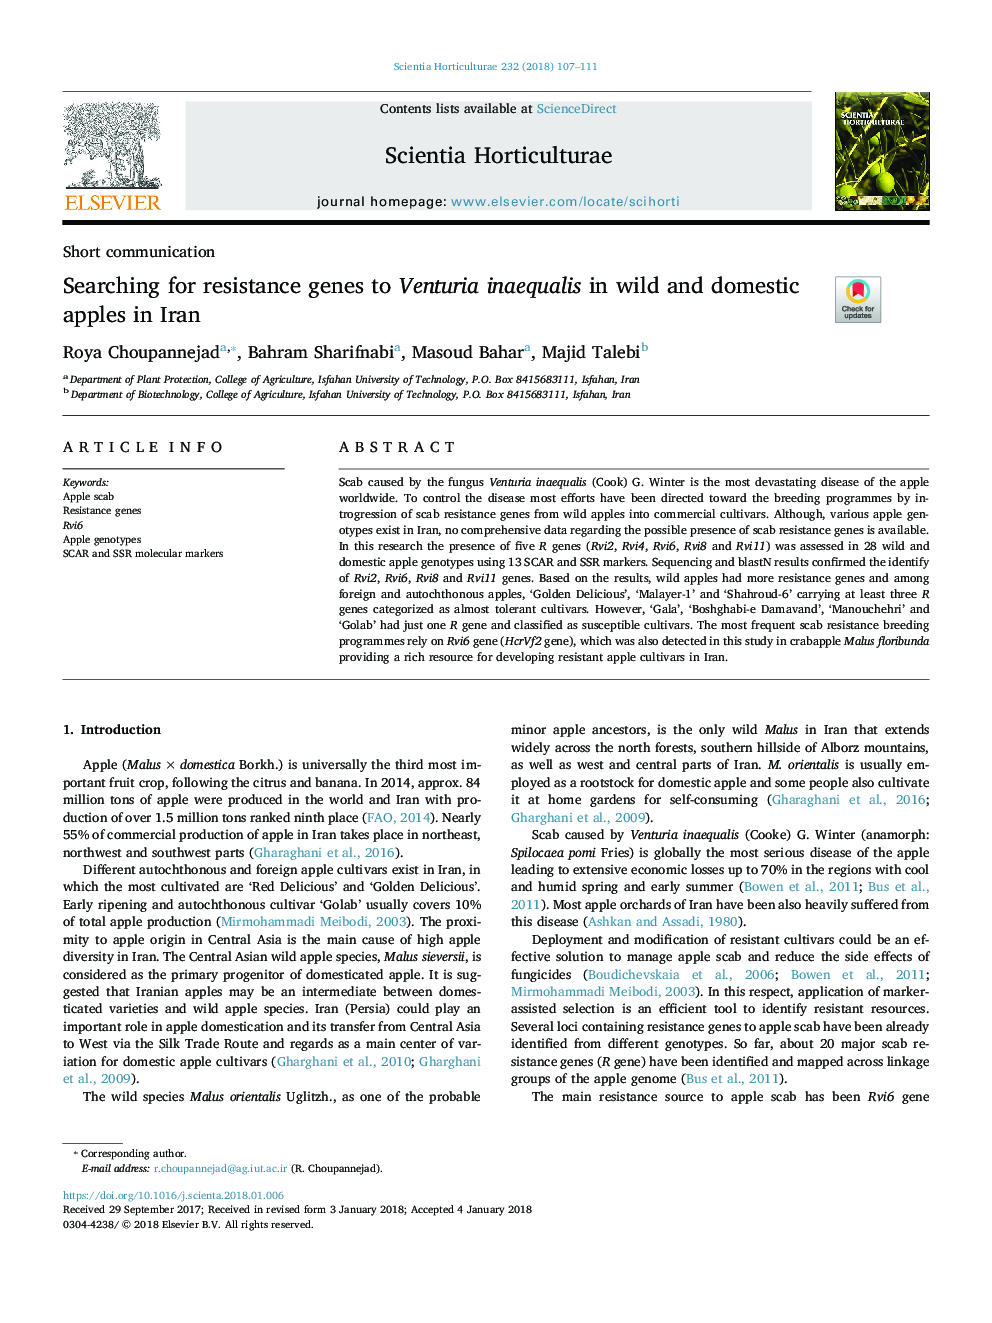 Searching for resistance genes to Venturia inaequalis in wild and domestic apples in Iran